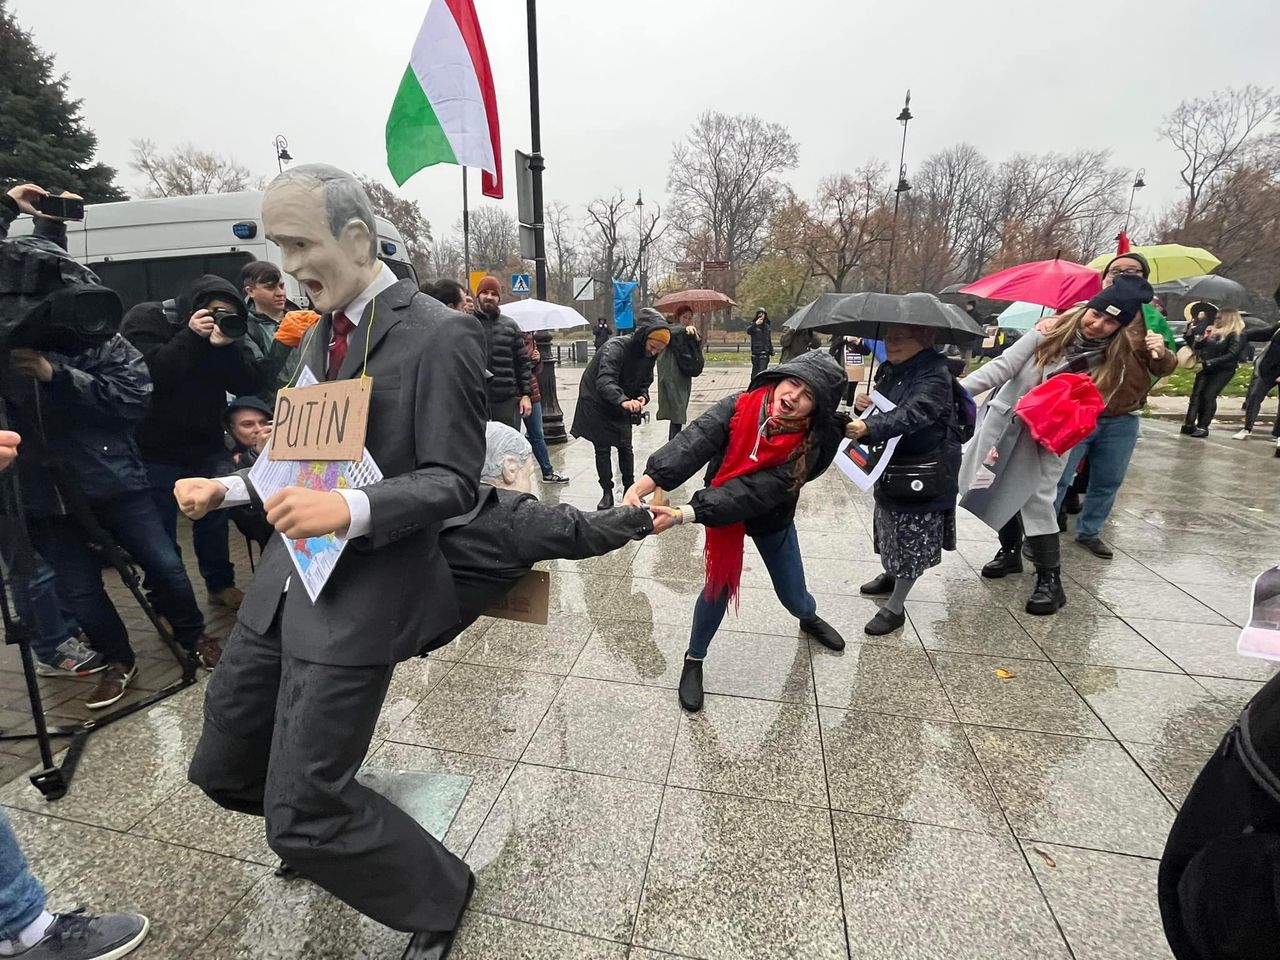 In Warsaw, activists staged provocative action to draw attention to Orbán’s dependence on Russia